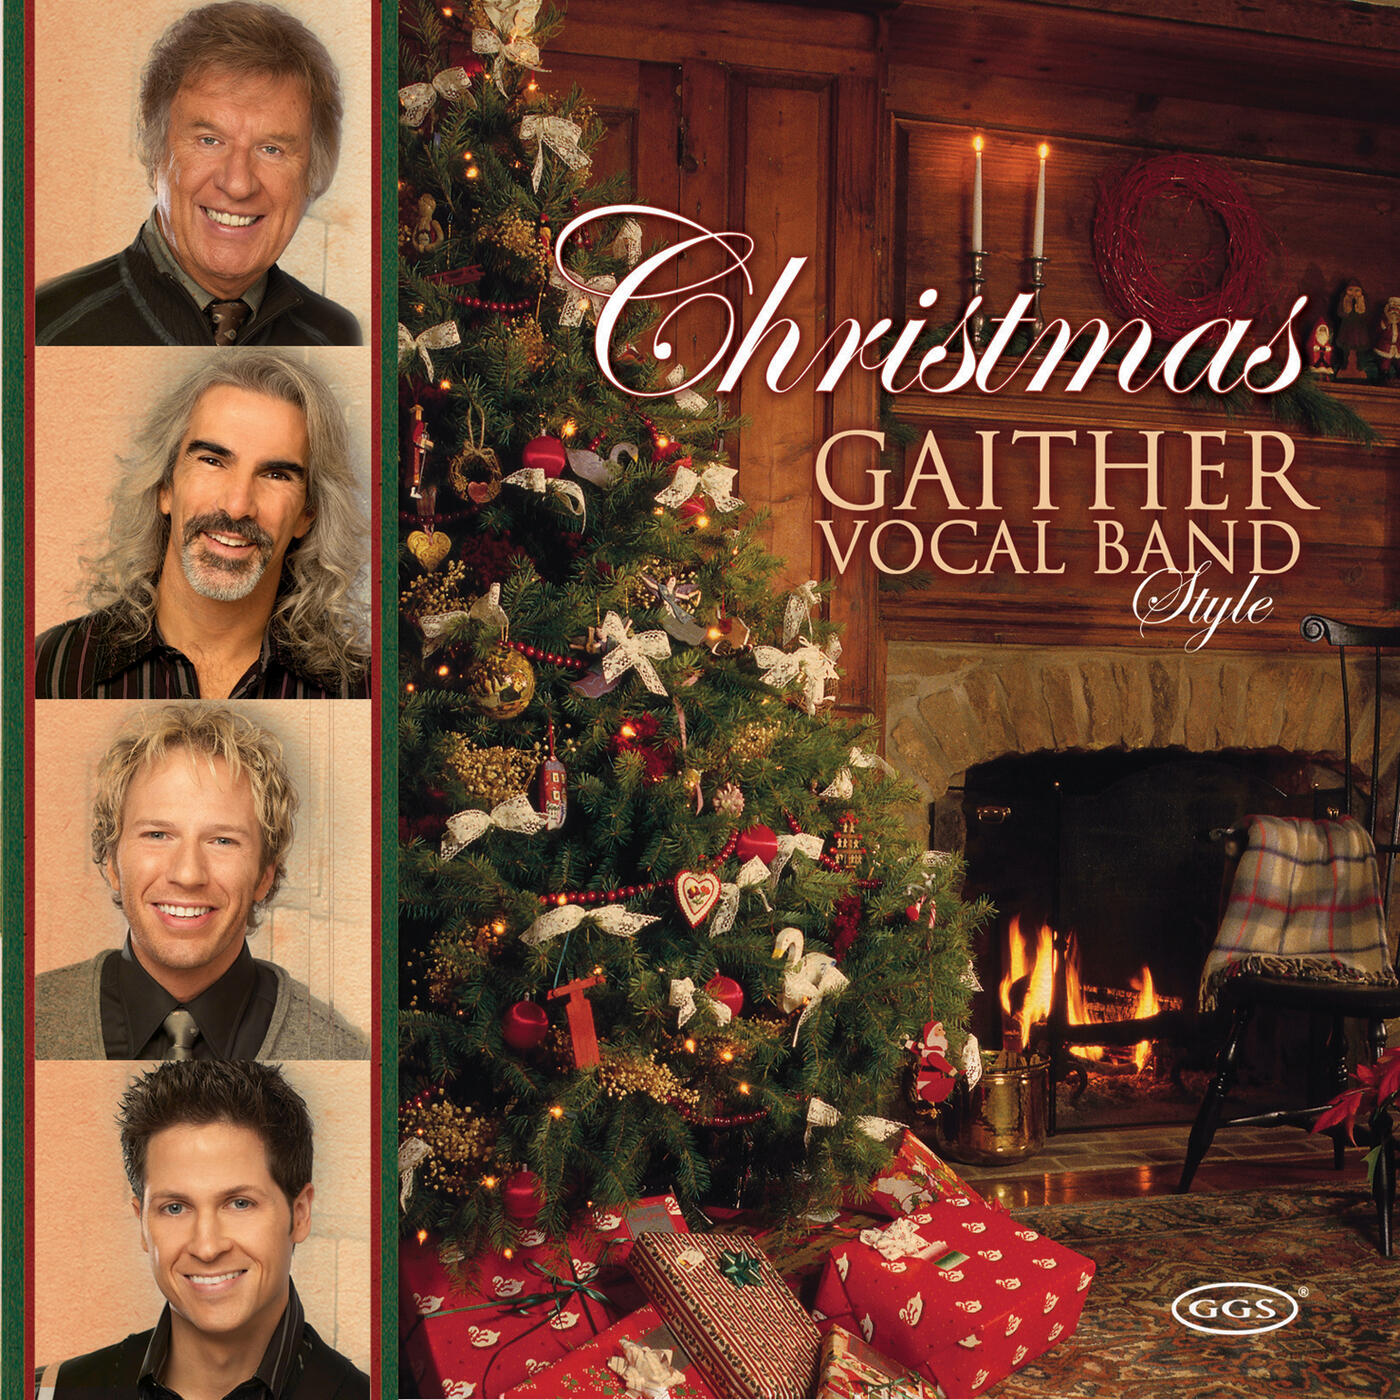 Gaither Vocal Band Christmas Gaither Vocal Band Style iHeart